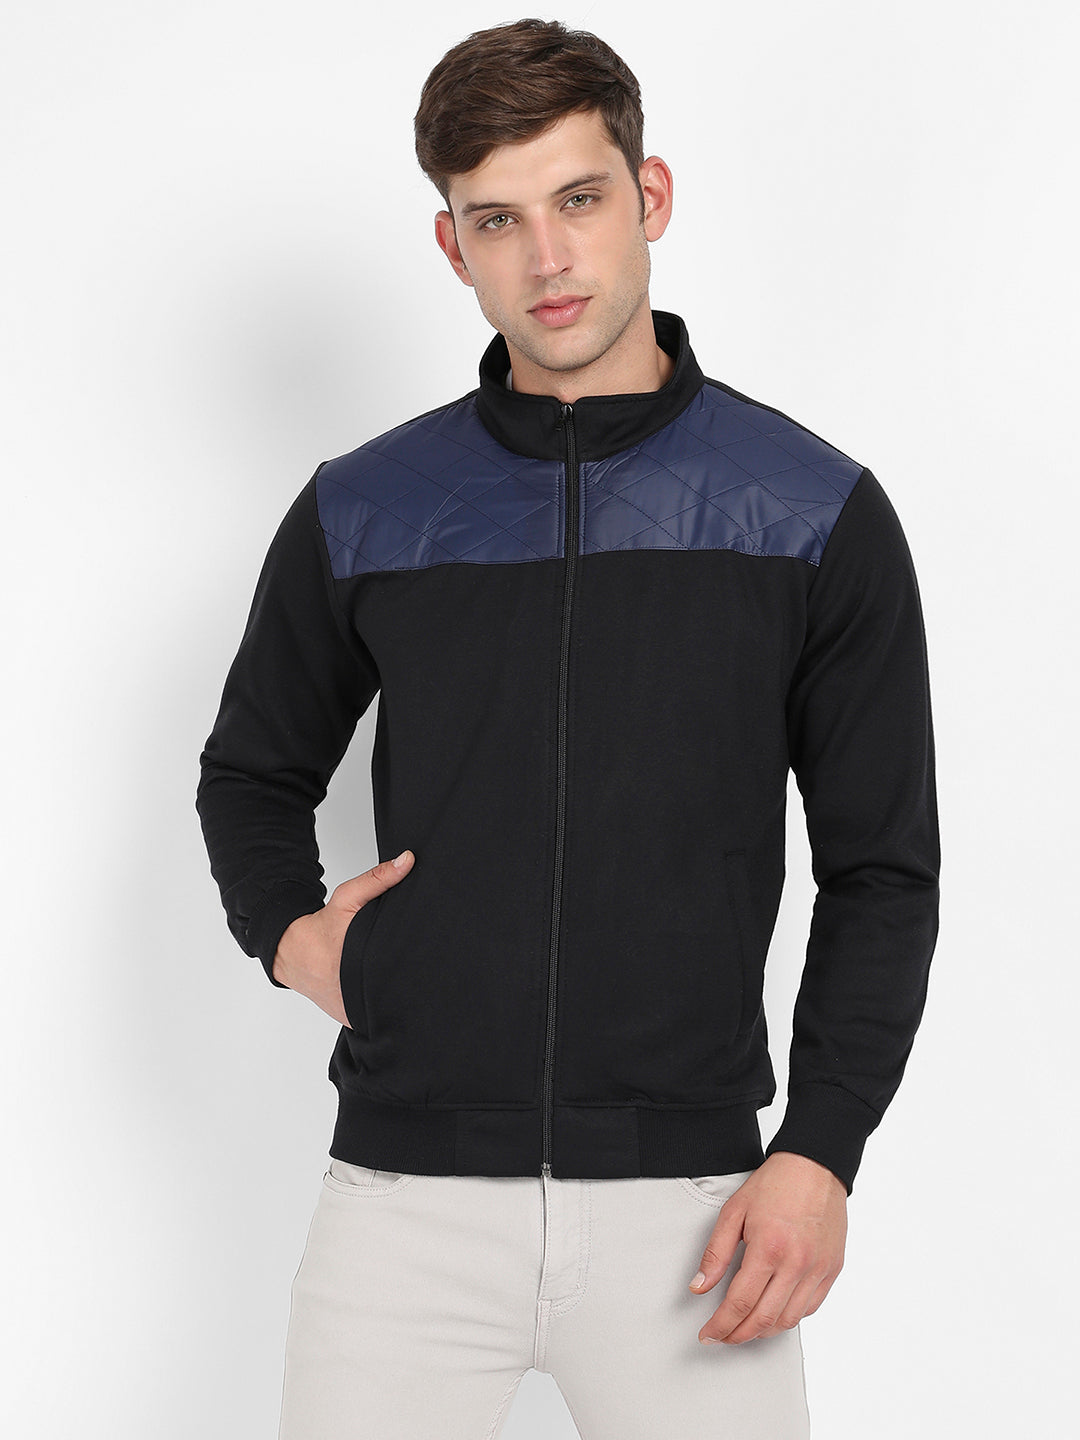 men s black blue zip front jacket with quilted detail